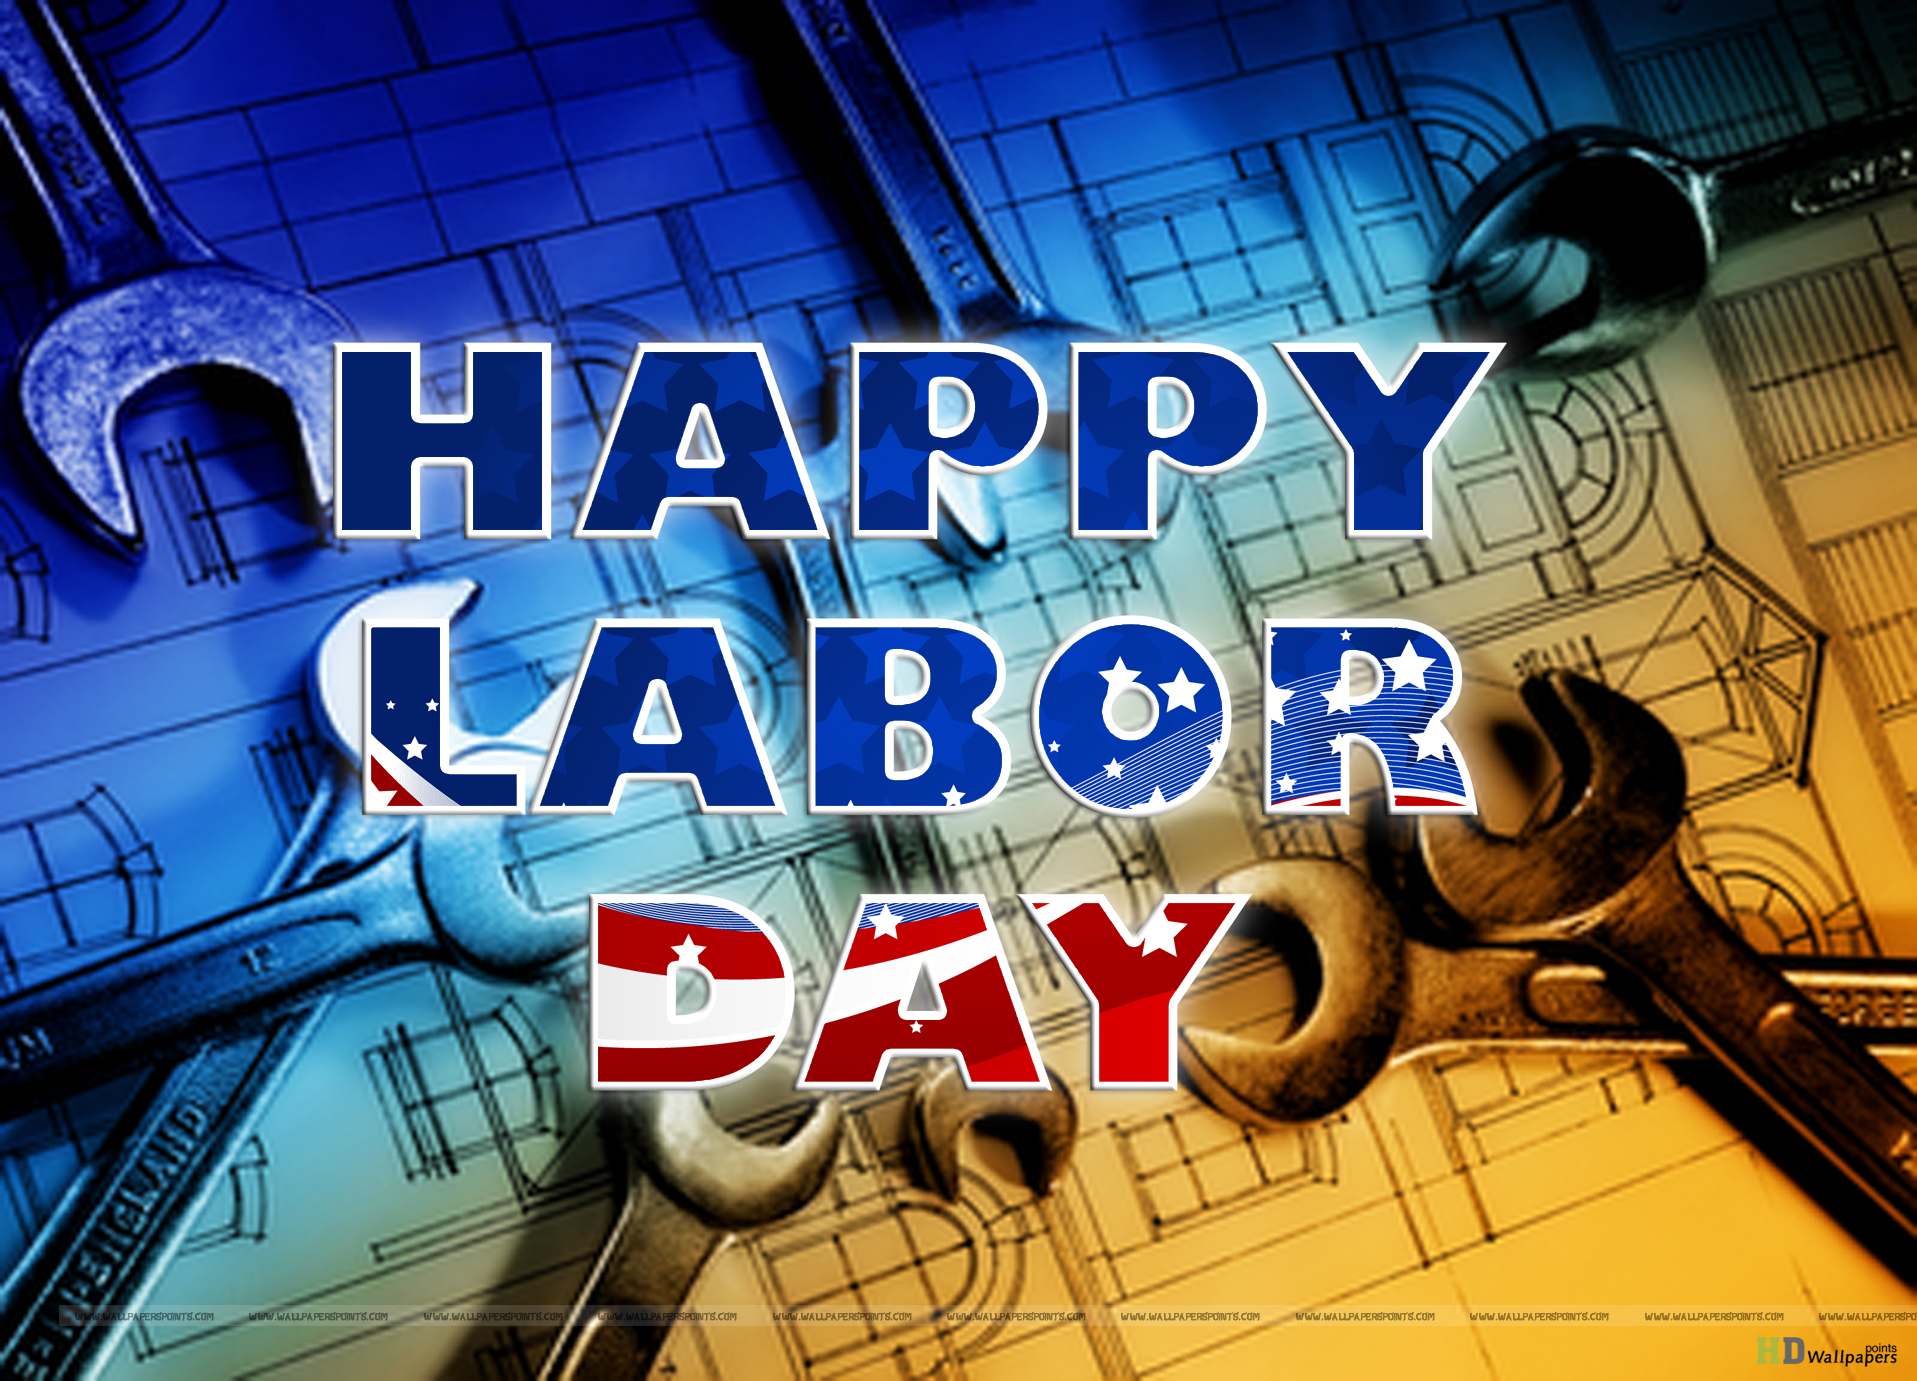 Workers Day HD Photos Wallpaper images Labour Day Wishes Pic